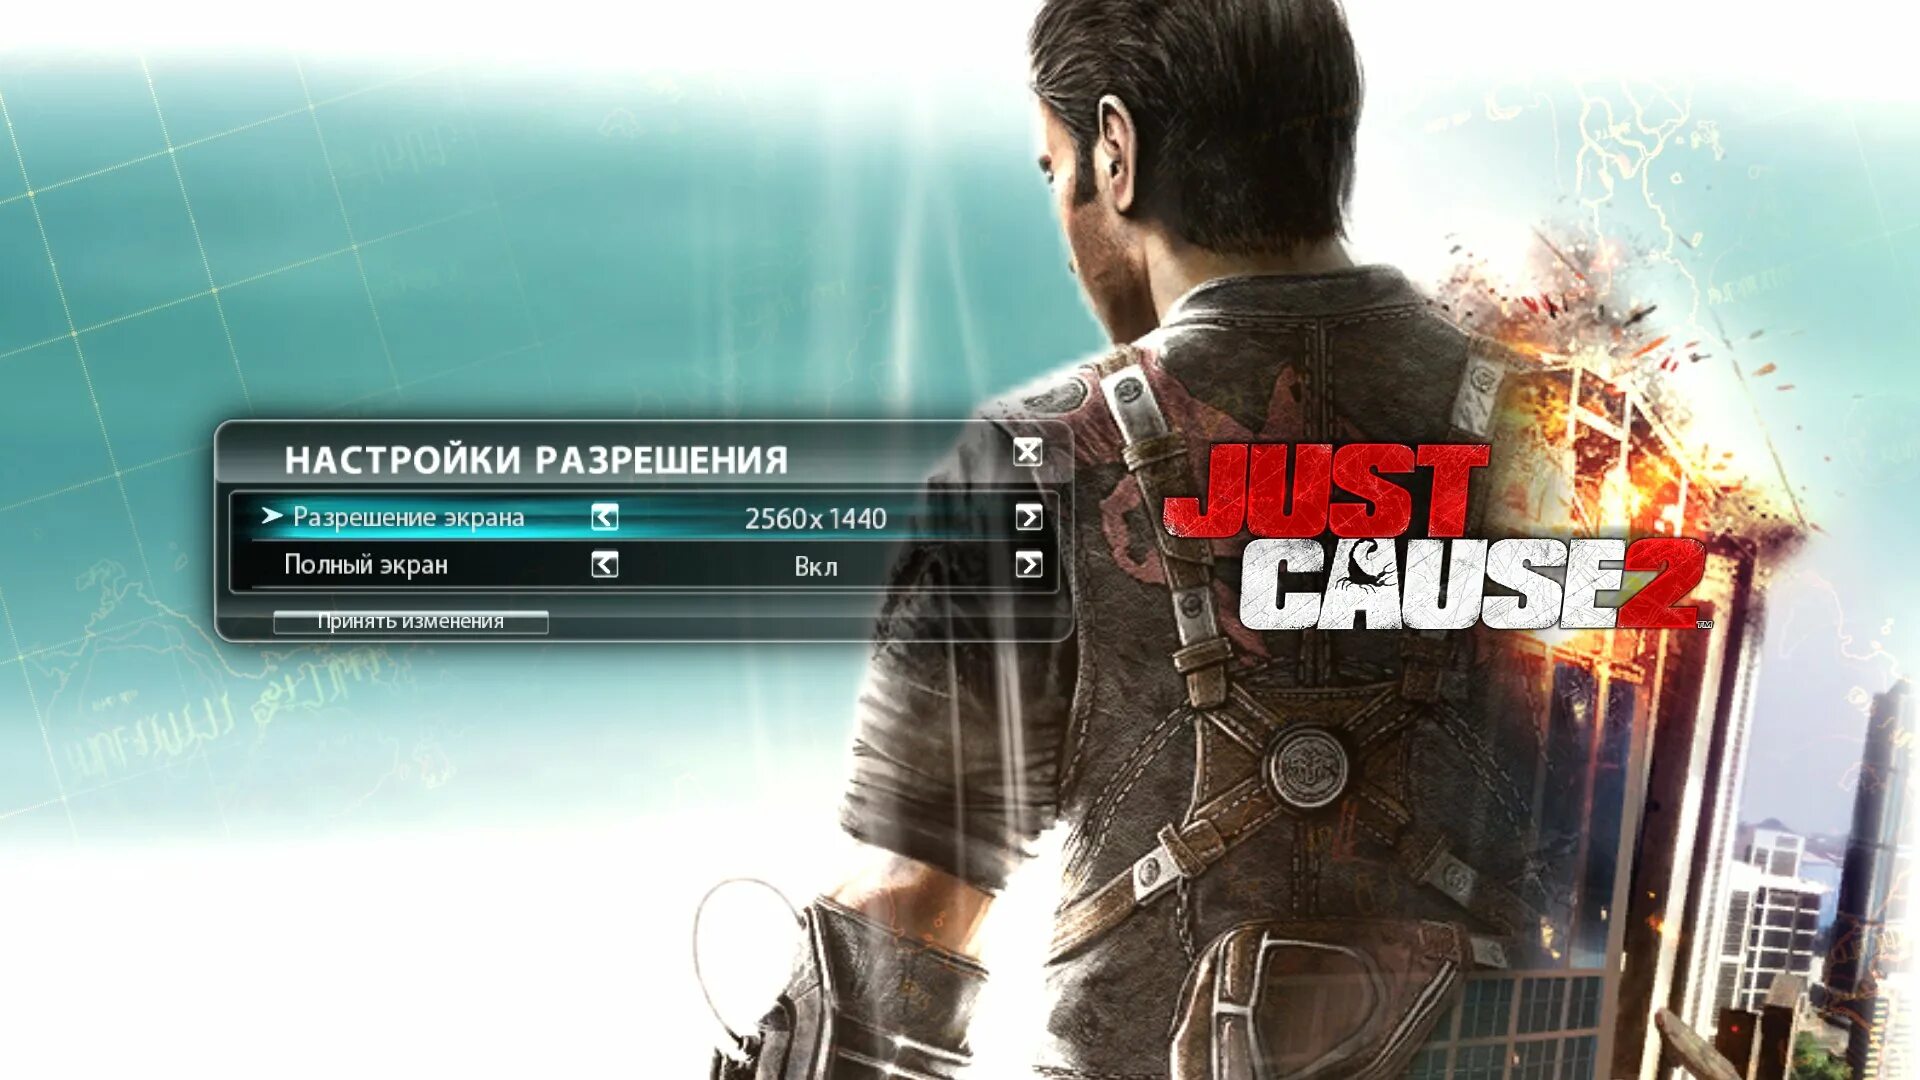 Just cause 2 Xbox 360 диск. Just cause 1 диск. Just cause 2 диск. Разрешение экрана в играх. All just a game